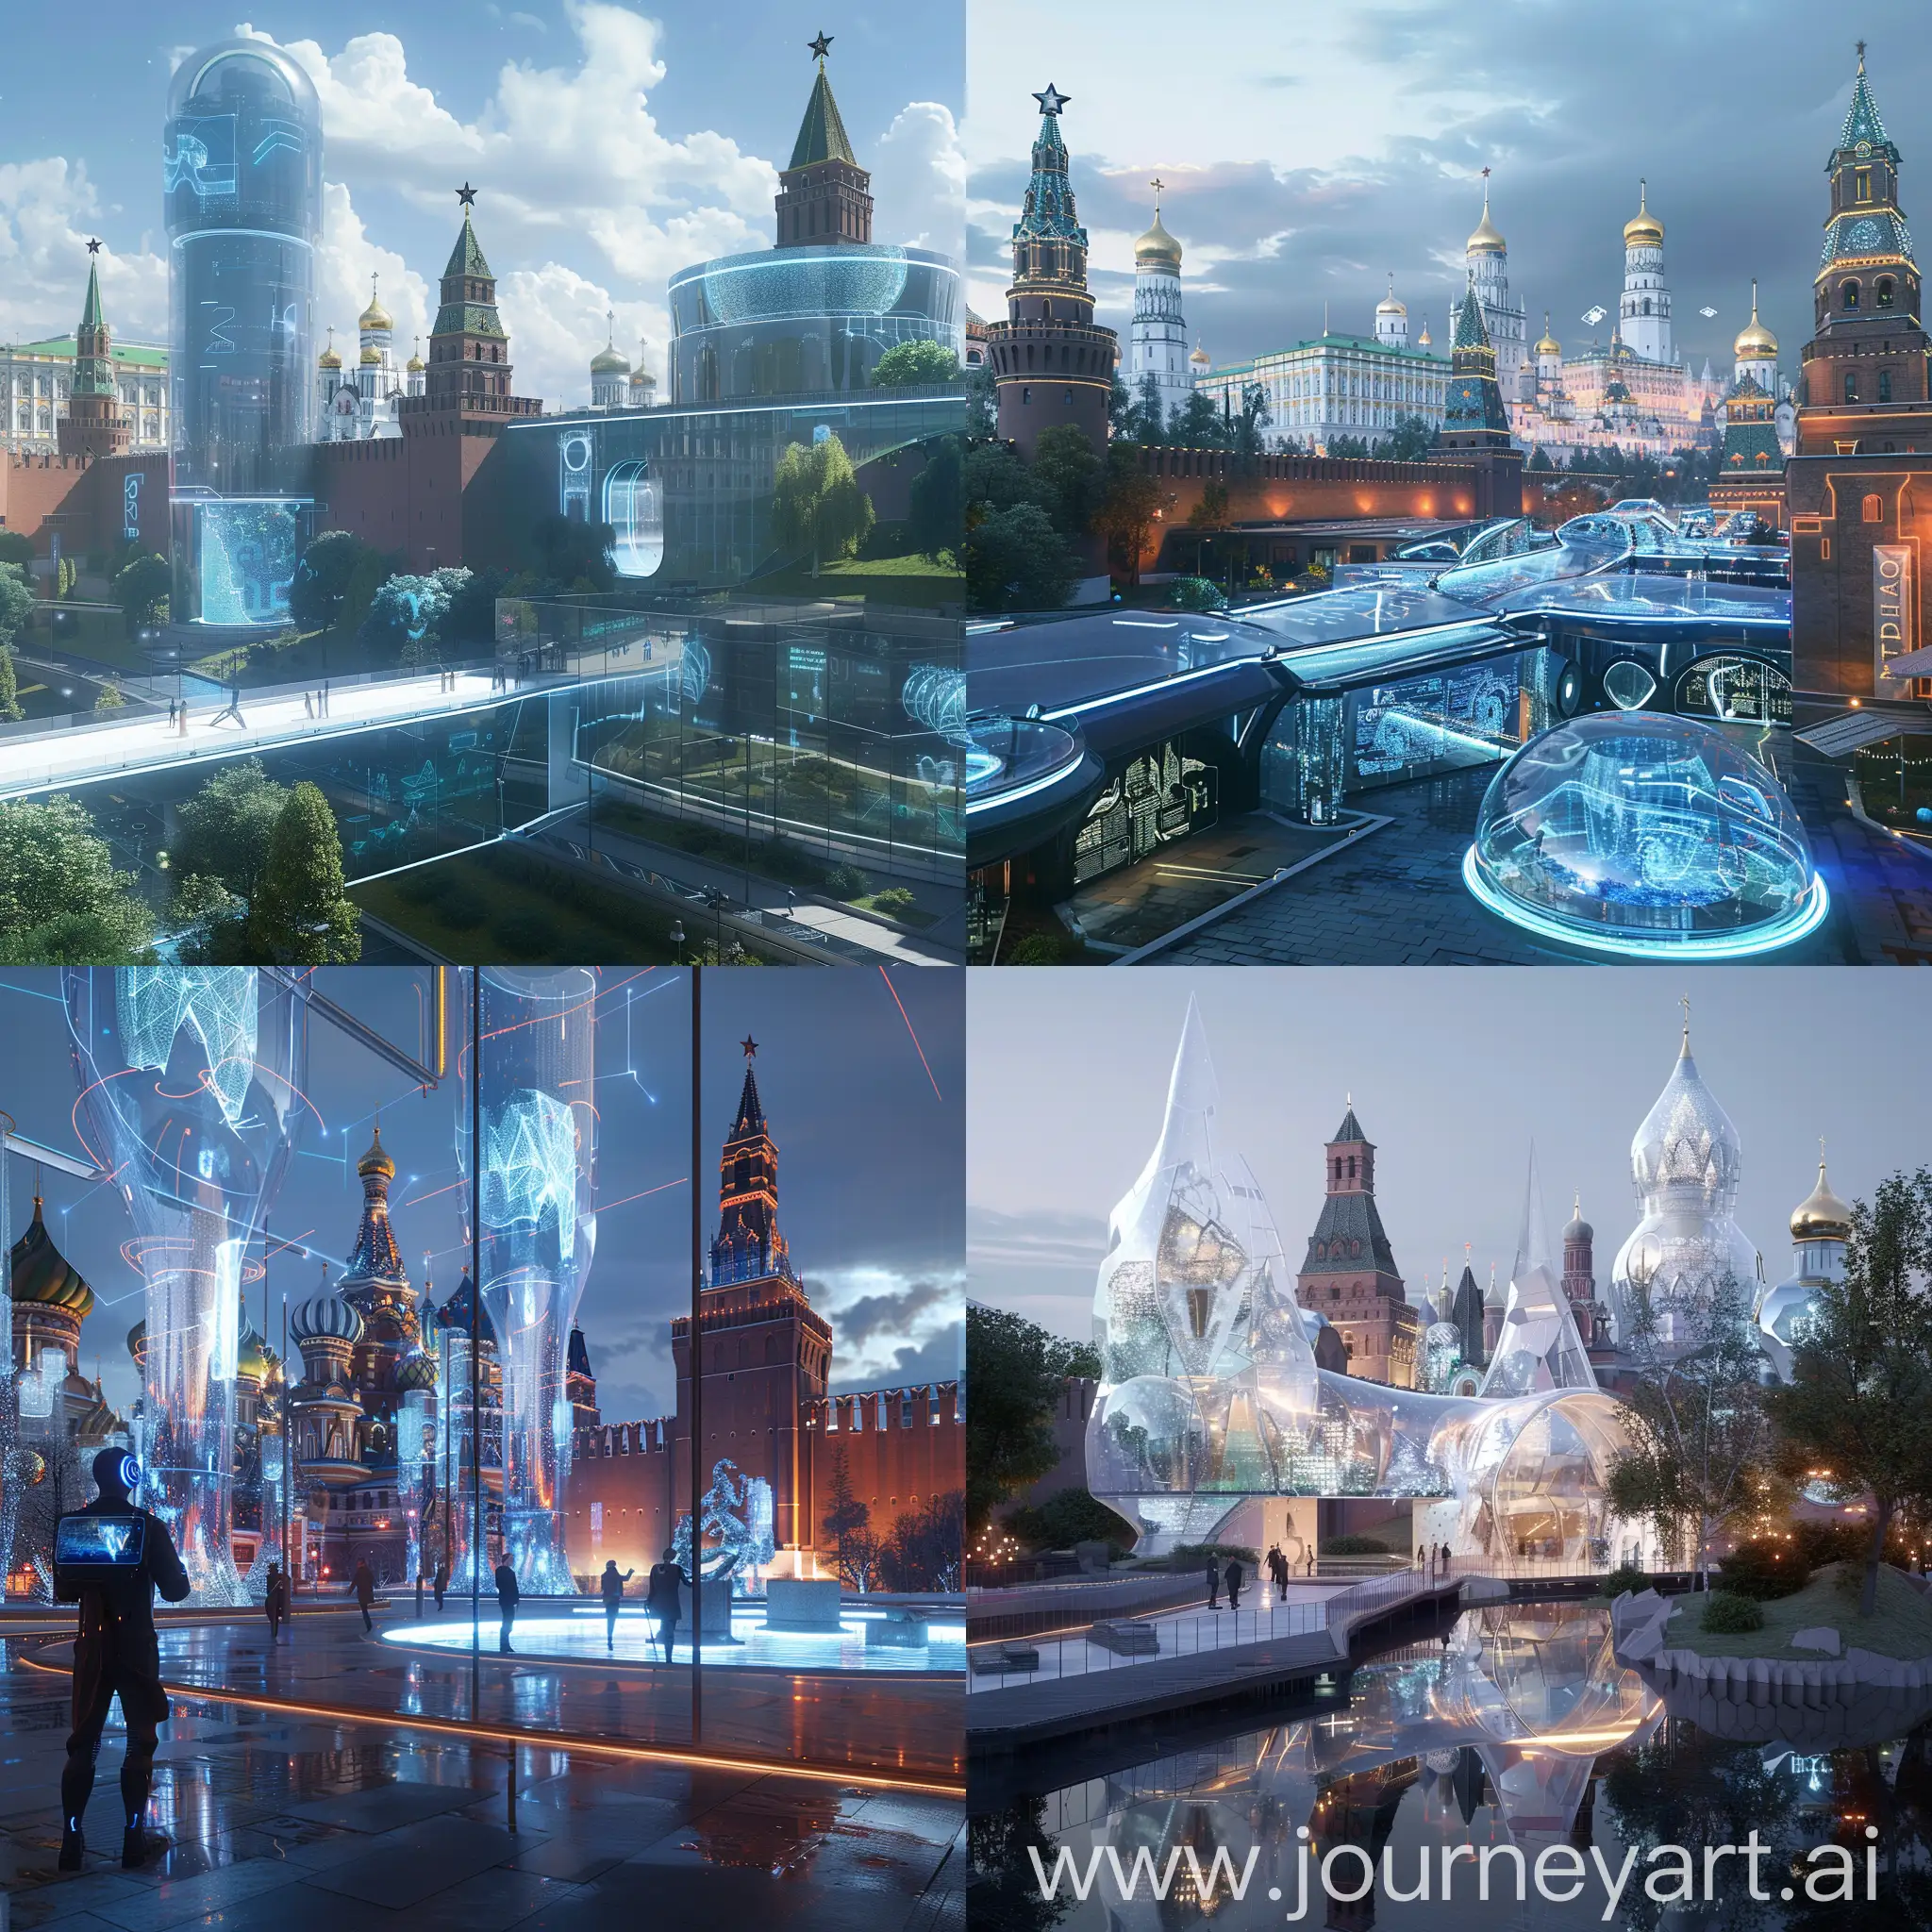 Futuristic Moscow Kremlin, in futuristic style, Smart Glass Surfaces, Holographic Guides, Augmented Reality Enhancements, Biometric Security Systems, Nanotechnology Preservation, Virtual Reality Chambers, Dynamic Lighting Systems, Self-Navigating Tours, Interactive Art Installations, Energy Harvesting Systems, Sustainable Façade Materials, Adaptive Lighting Systems:, Integrated Green Spaces, Interactive Digital Art Installations, Solar Panel Integration, Reflective Surfaces, Augmented Reality Monuments, Kinetic Sculptures, Aquatic Features, Integrated Transportation Hub, unreal engine 5